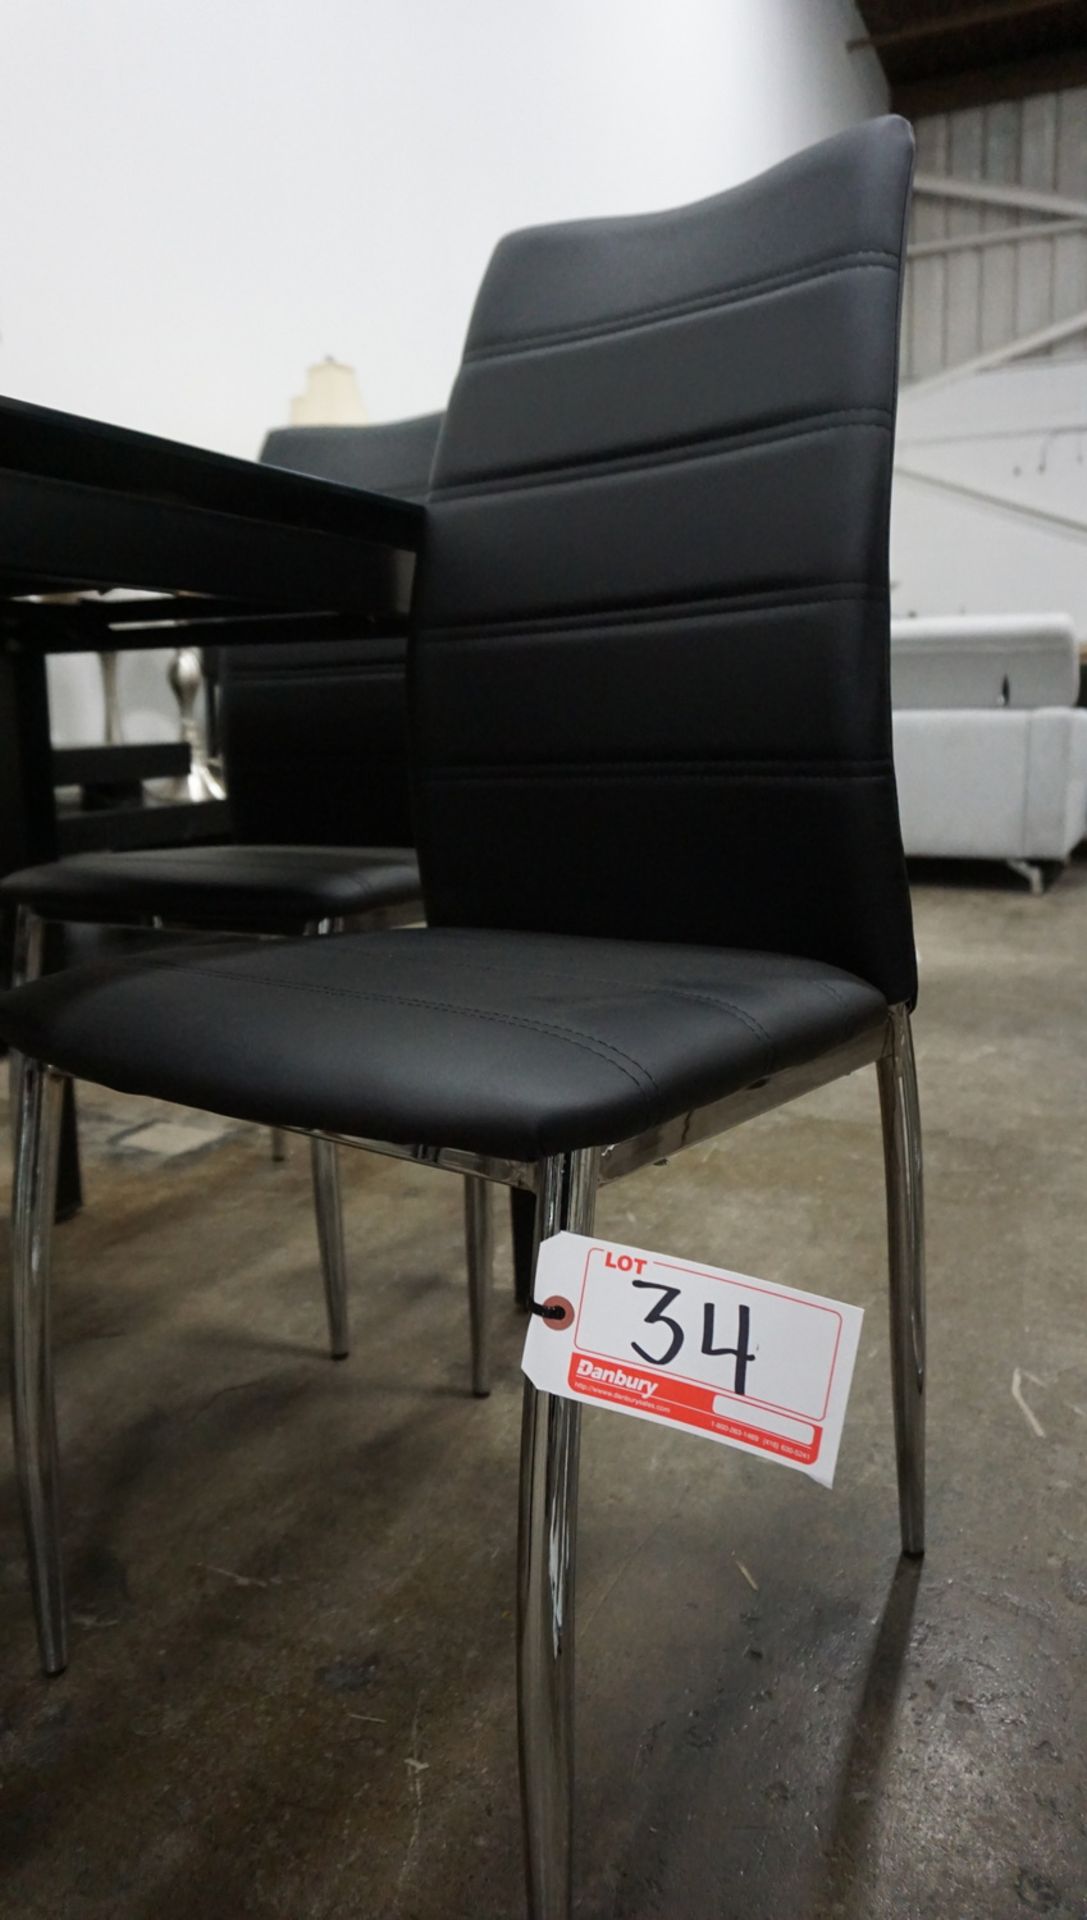 LOT - TEMPERED GLASS DINING TABLE C/W (4) BLK BUTTON TUFT DINING CHAIRS W/ CHROME BASE - Image 2 of 2